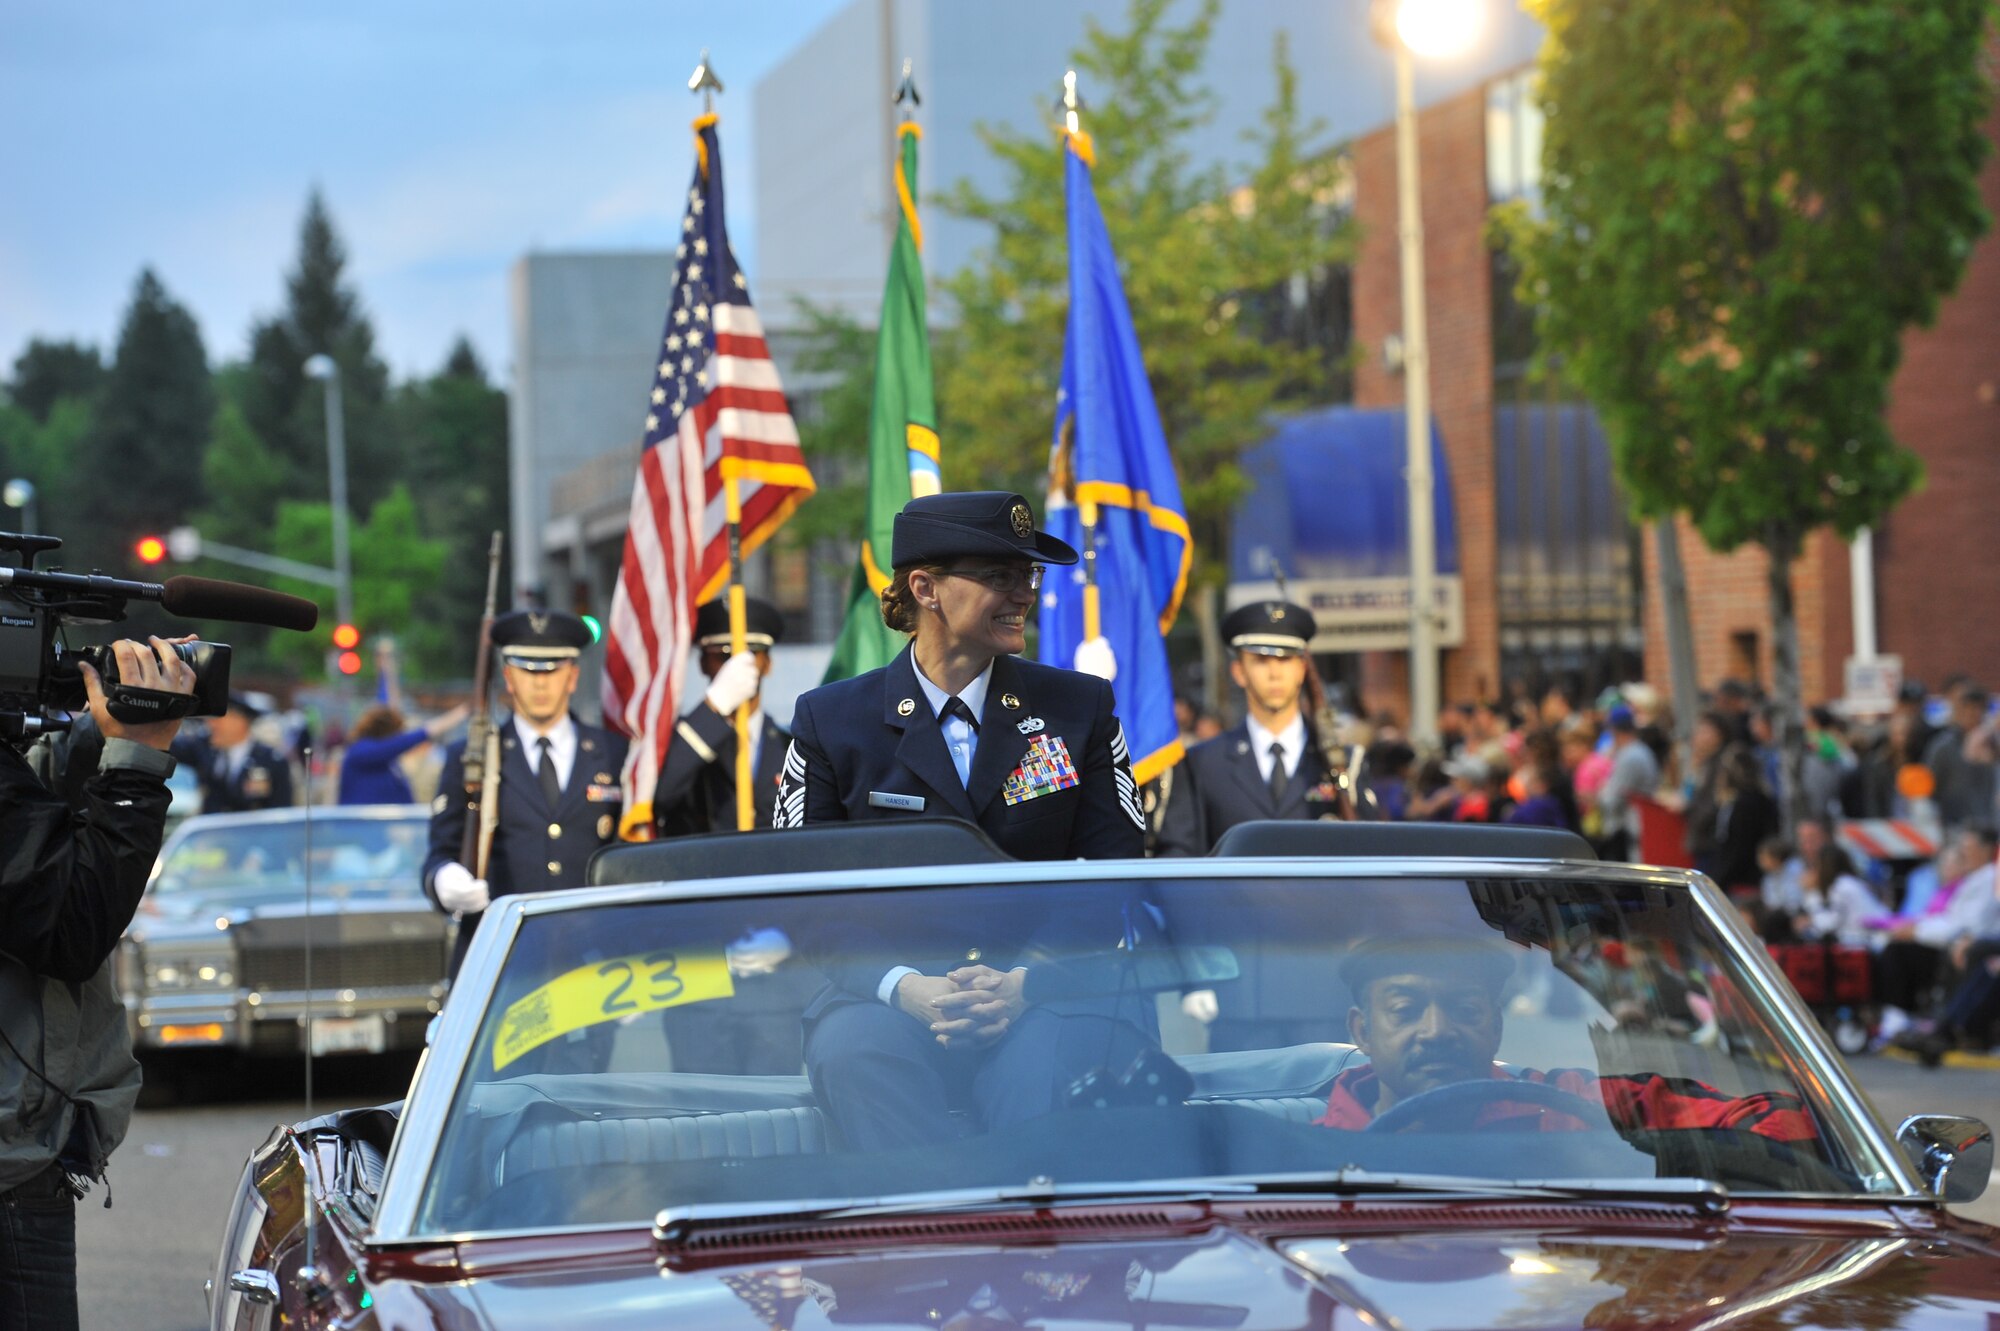 Chief Master Sgt. Wendy Hansen represents Team Fairchild during the Lilac Festival 2014 Armed Forced Torchlight Parade in Spokane Wash., May 17, 2014. The 75-year-old tradition is made to honor service members of both the past and present. Hansen is the 92nd Air Refueling Wing command chief. (U.S. Air Force photo by Staff Sgt. Veronica Montes/Released) 